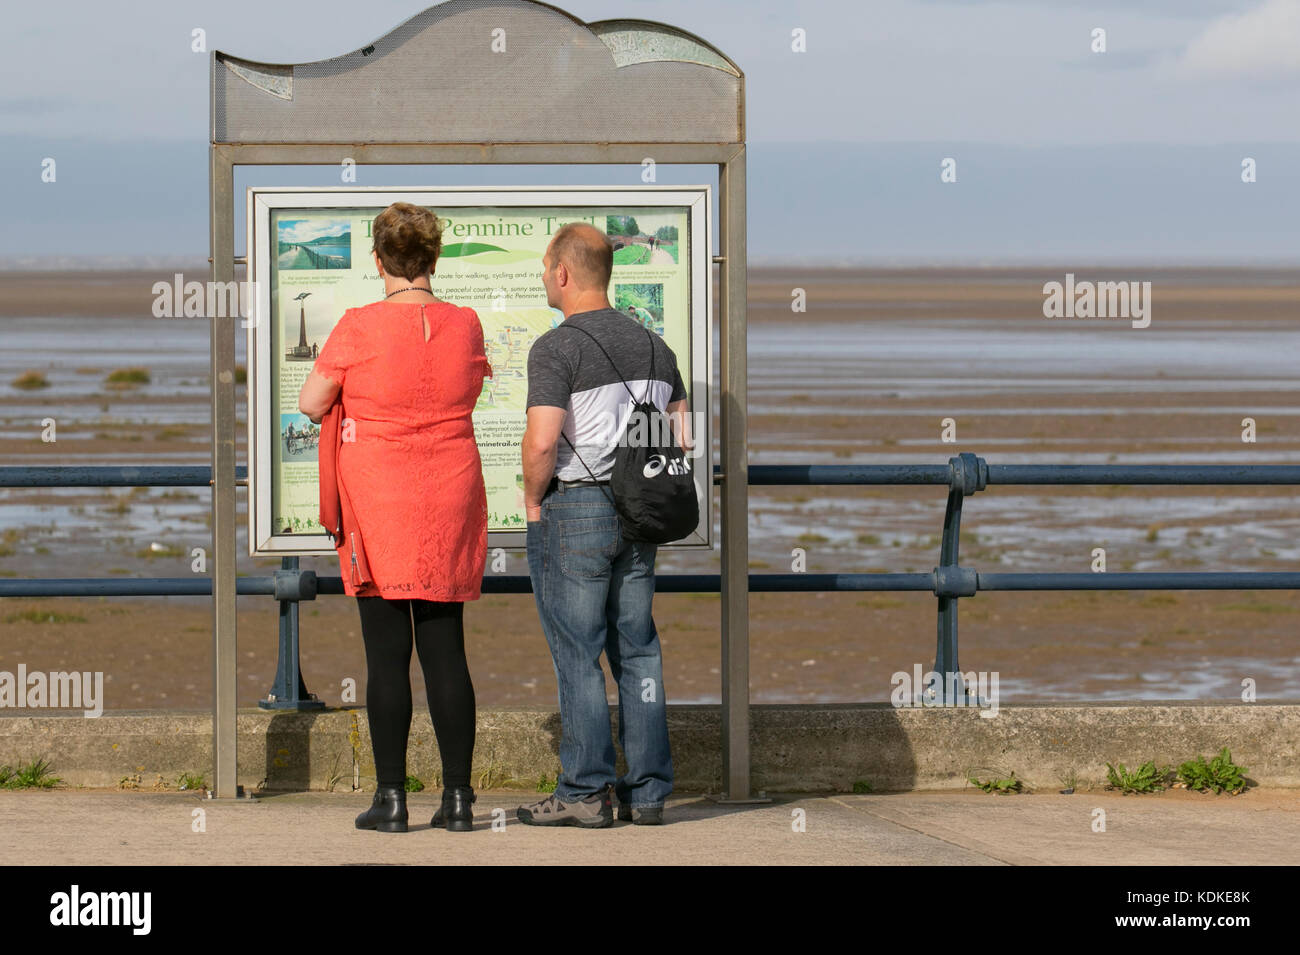 Attractions, maps & routes sign in Southport, Merseyside. UK  Weather.  October, 2017. 19C Sunny & blustery day on the seafront as the promised warm southerly winds arrive to bathe the resort. The remains of a tropical hurricane send thermometers soaring this weekend after an unseasonably balmy few days. In the UK, as we have absorbed the phrase 'Indian Summer' for a late burst of warmth in a settled autumnal spell. The phrase wasn’t used widely until the 1950s. Stock Photo